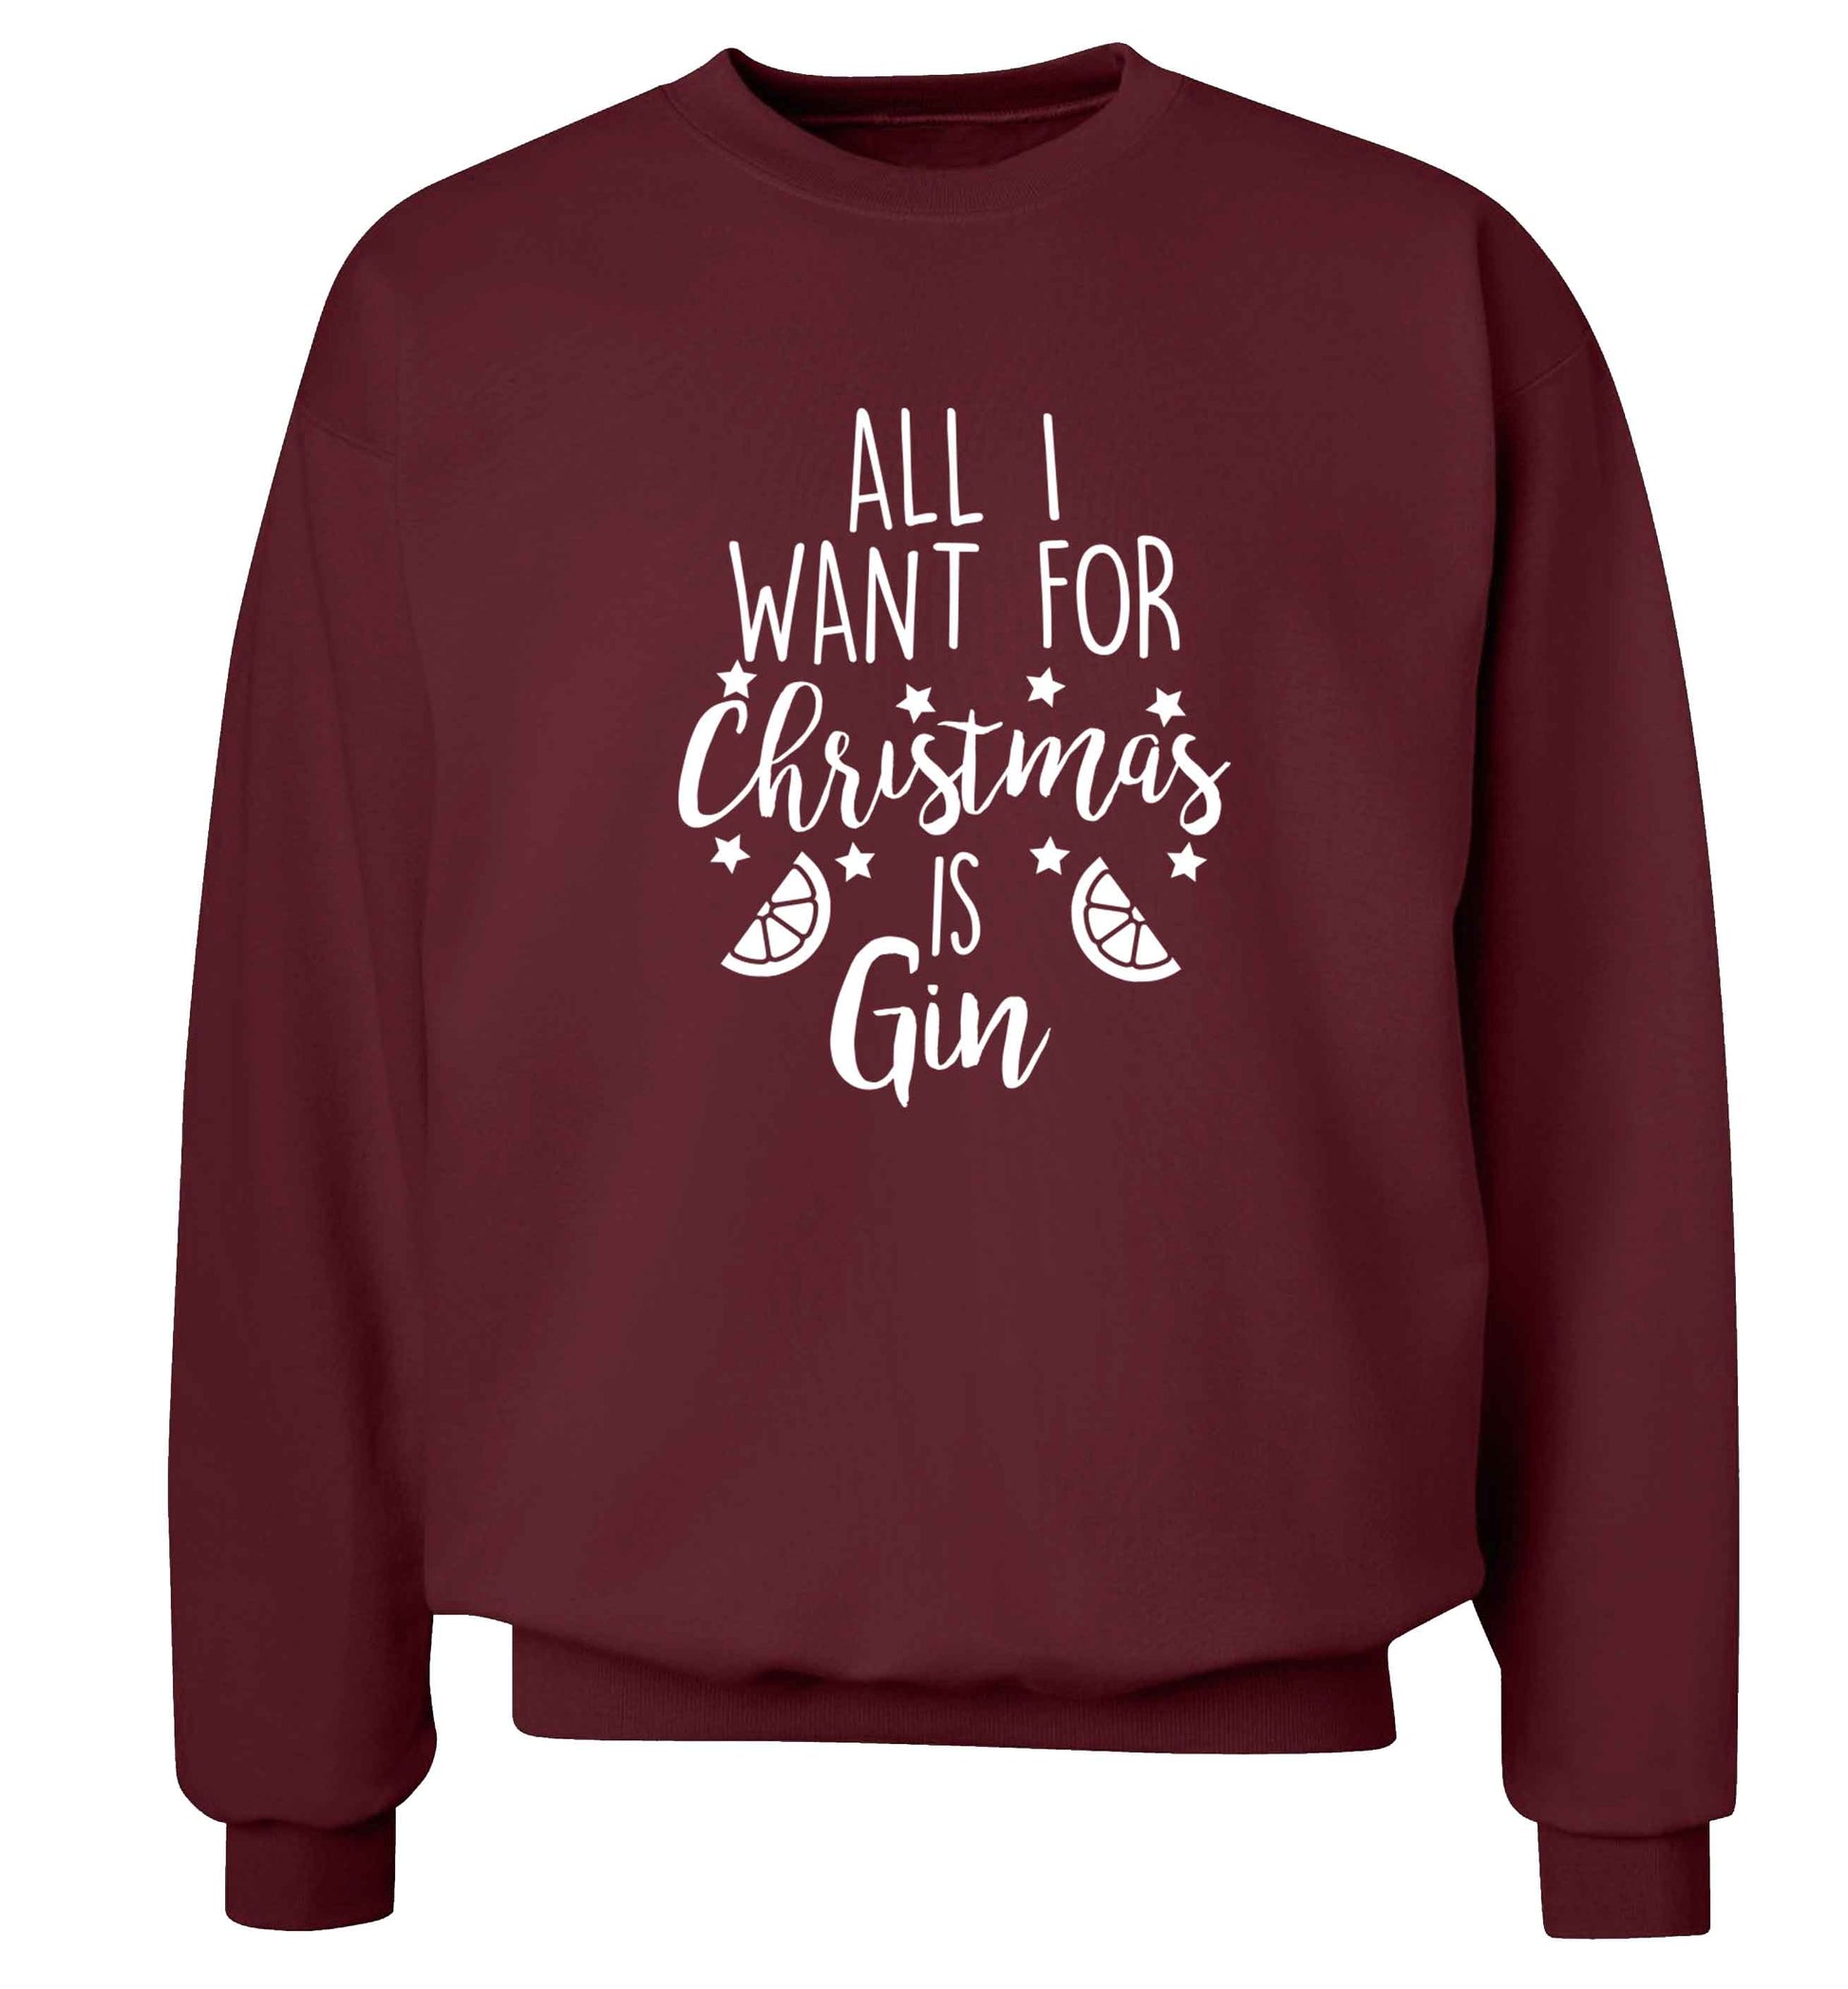 All I want for Christmas is gin Adult's unisex maroon Sweater 2XL